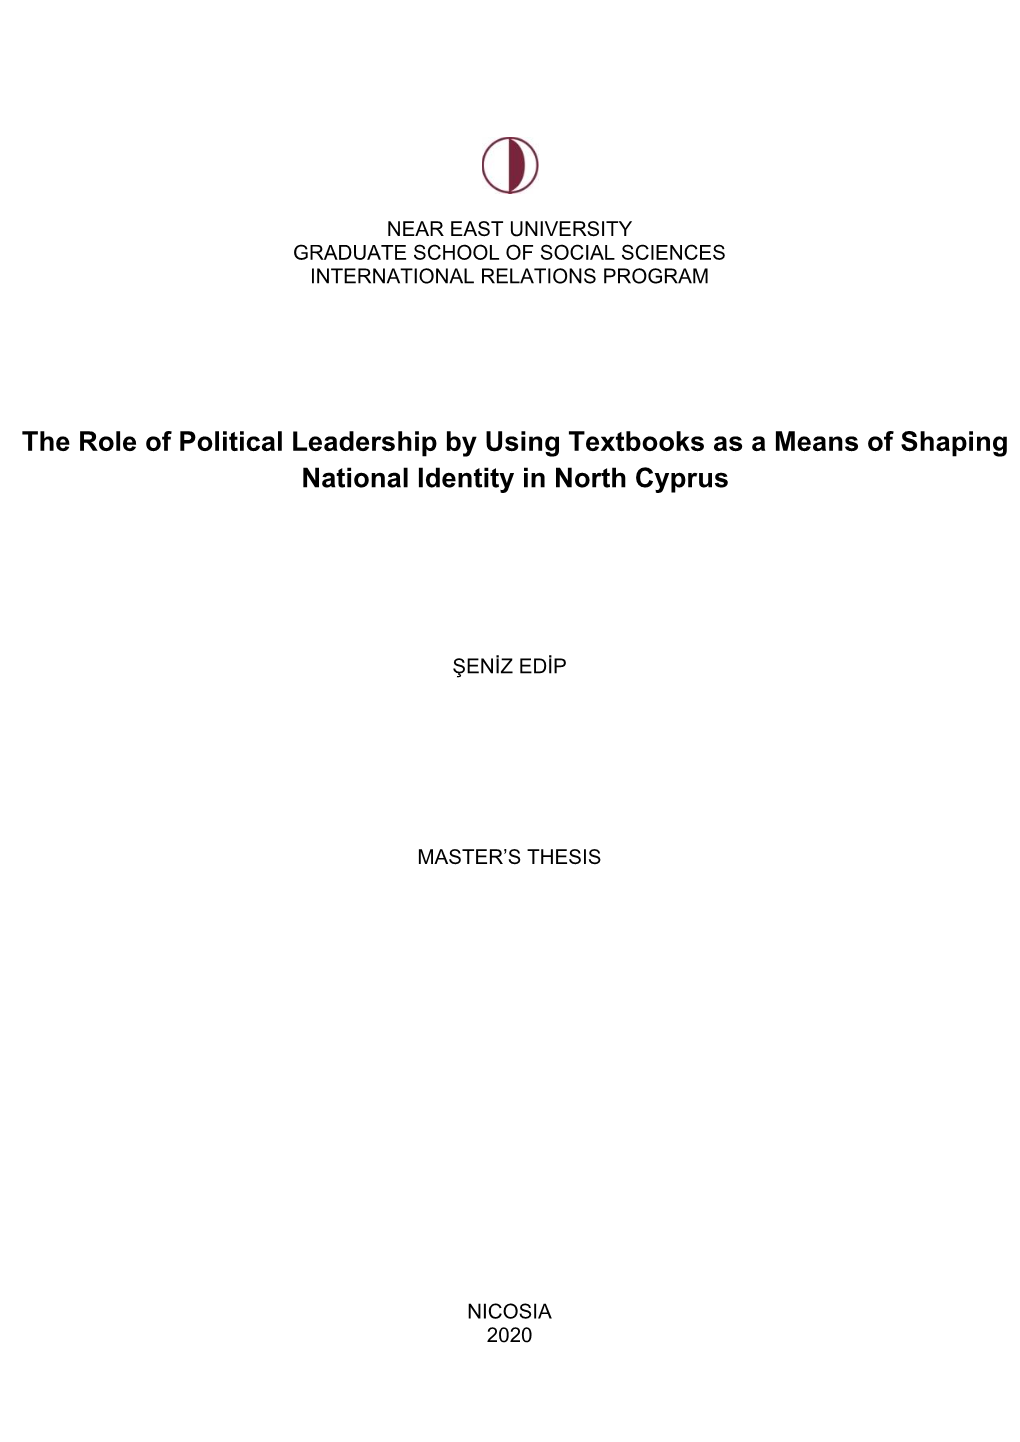 The Role of Political Leadership by Using Textbooks As a Means of Shaping